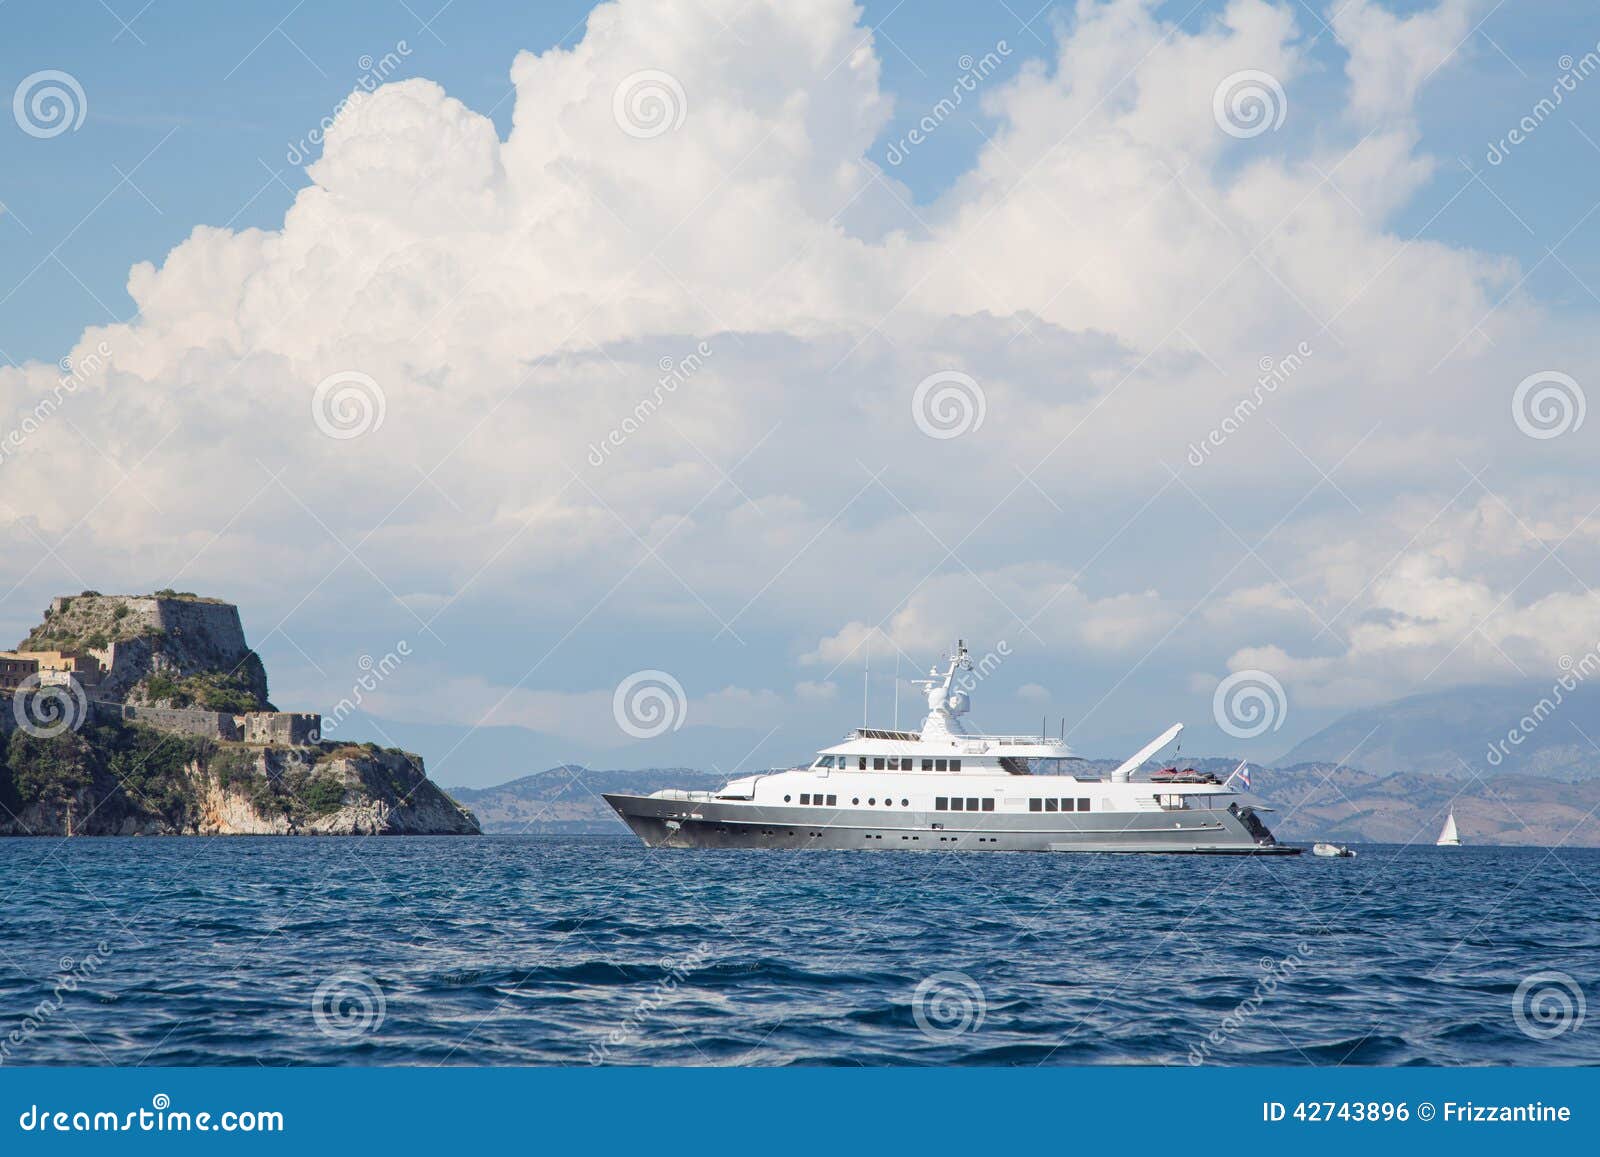 super yachts currently in corfu